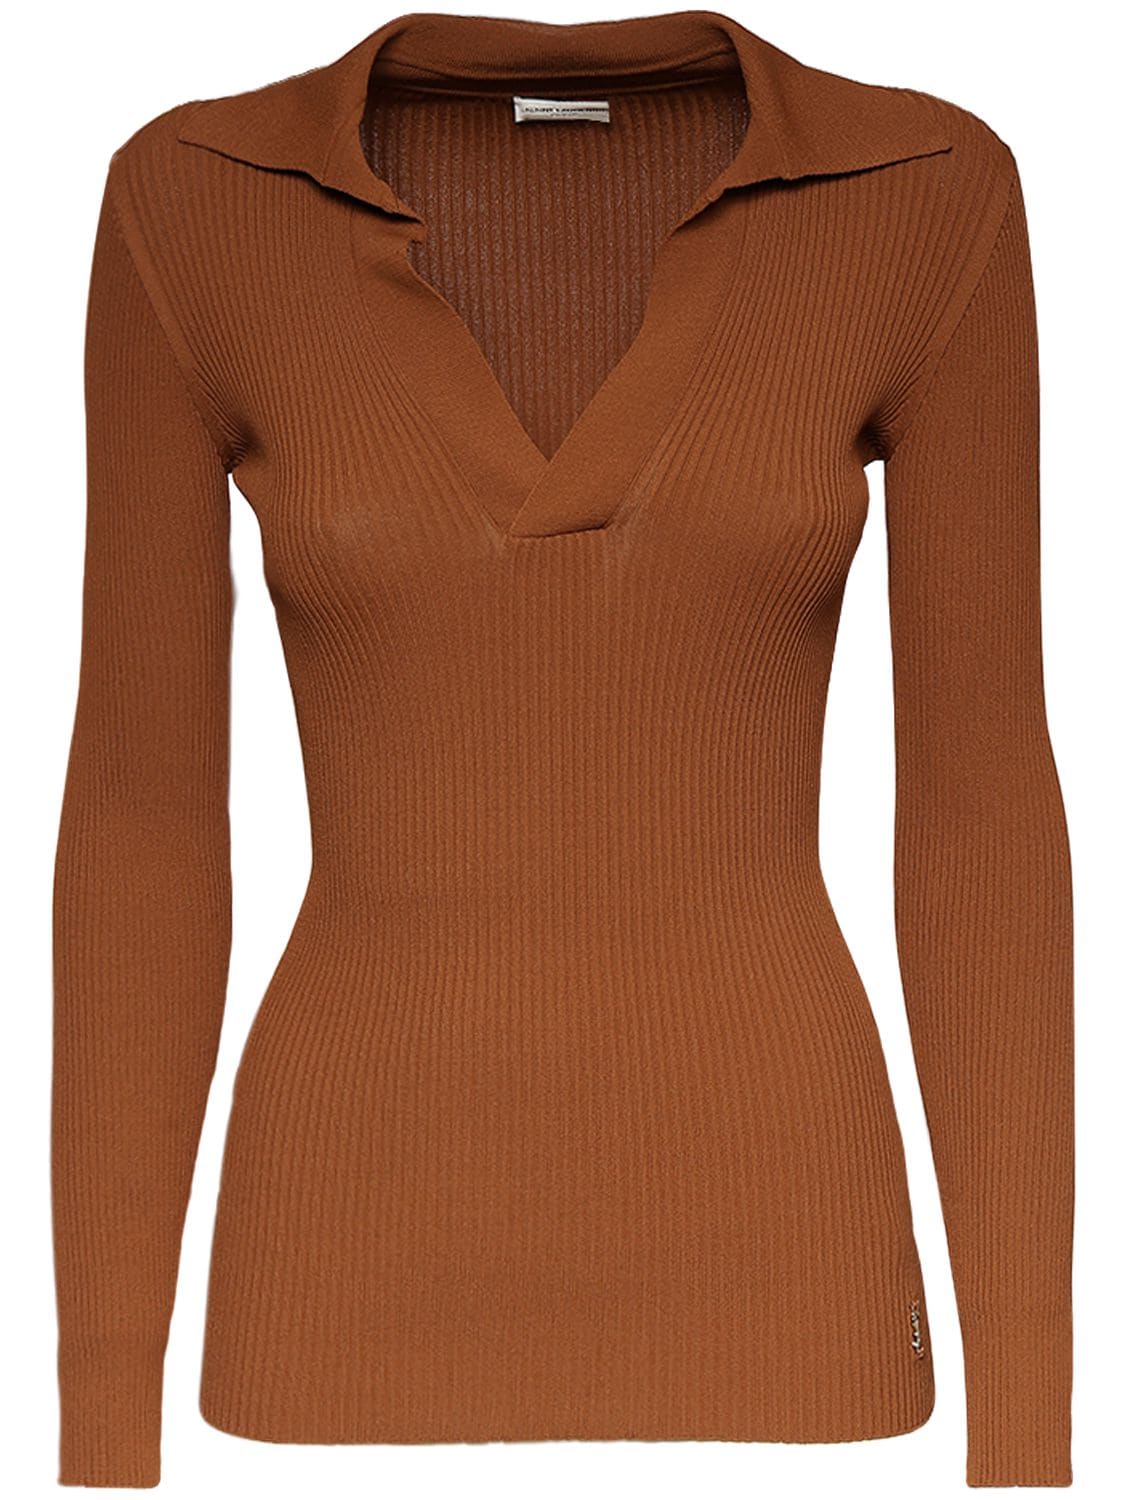 Saint Laurent Knitted Sweater In Caramel